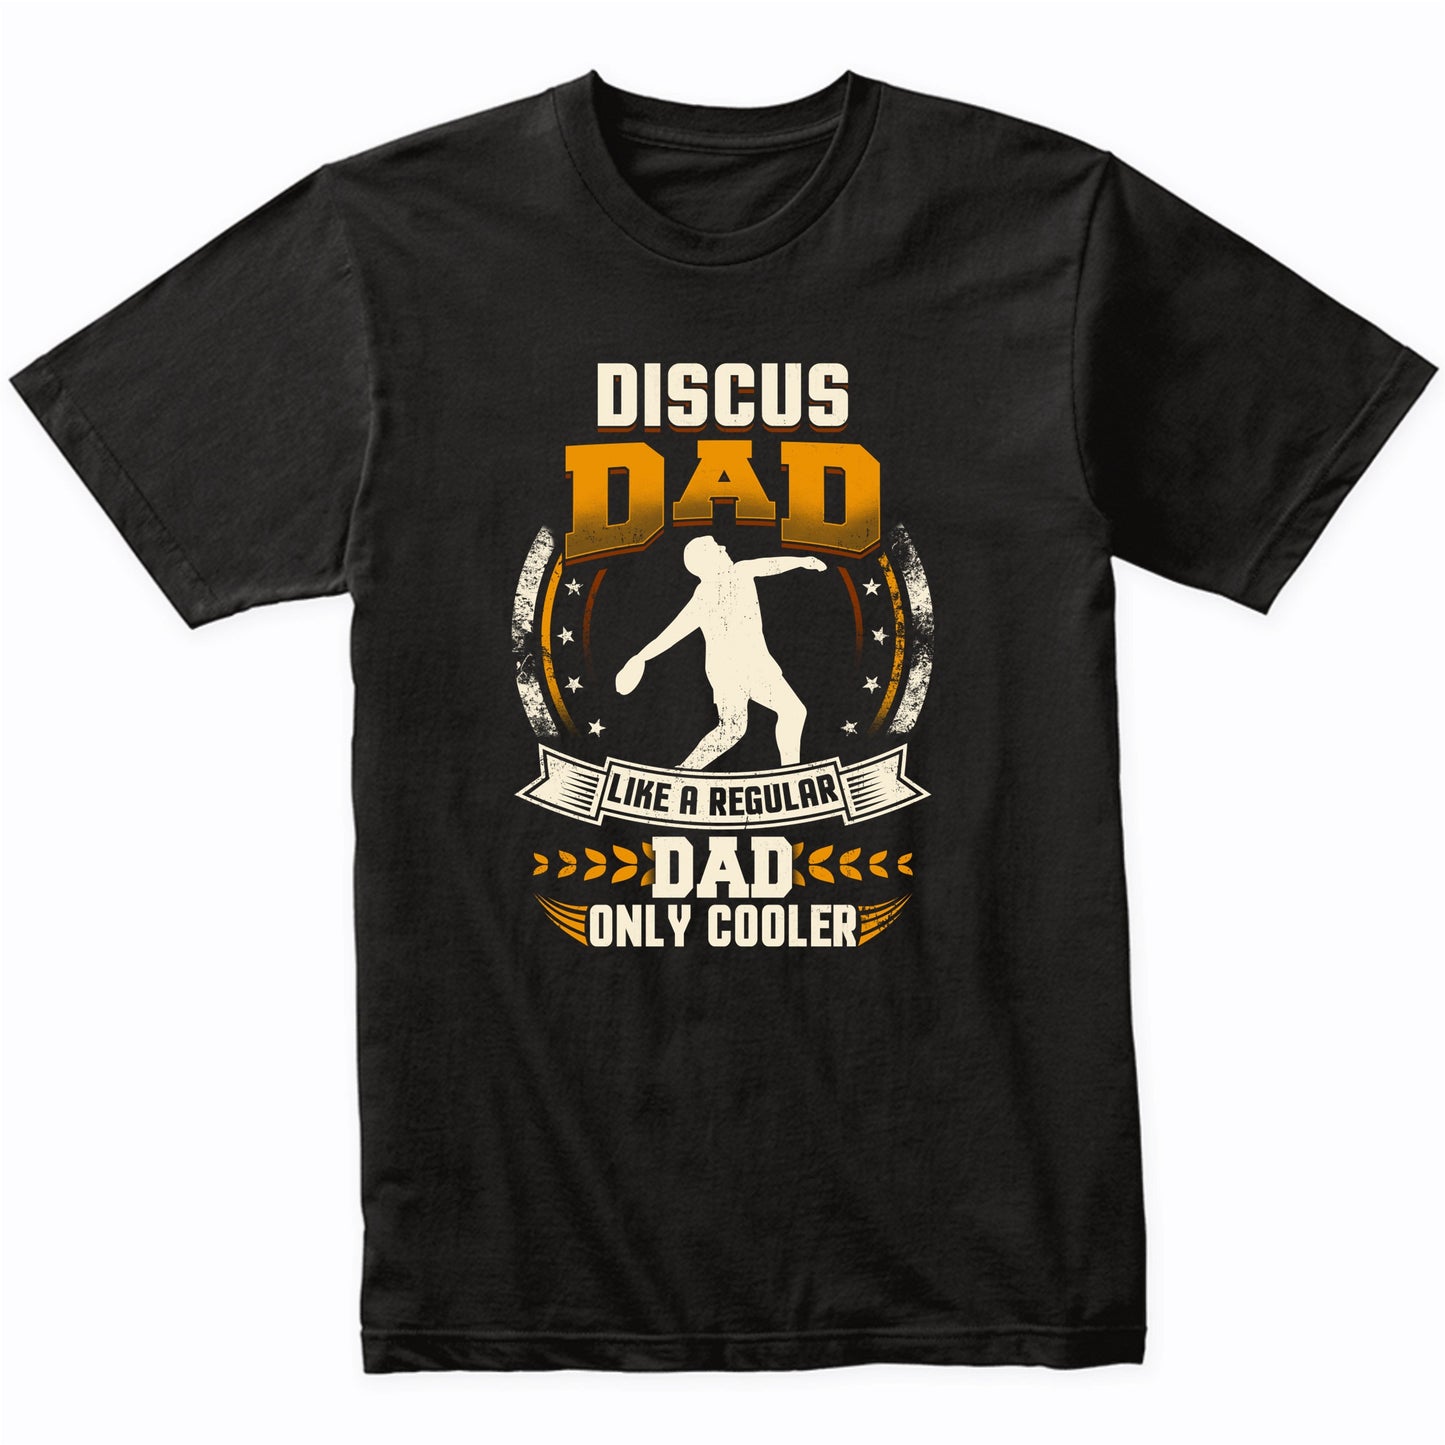 Discus Dad Like A Regular Dad Only Cooler Funny T-Shirt